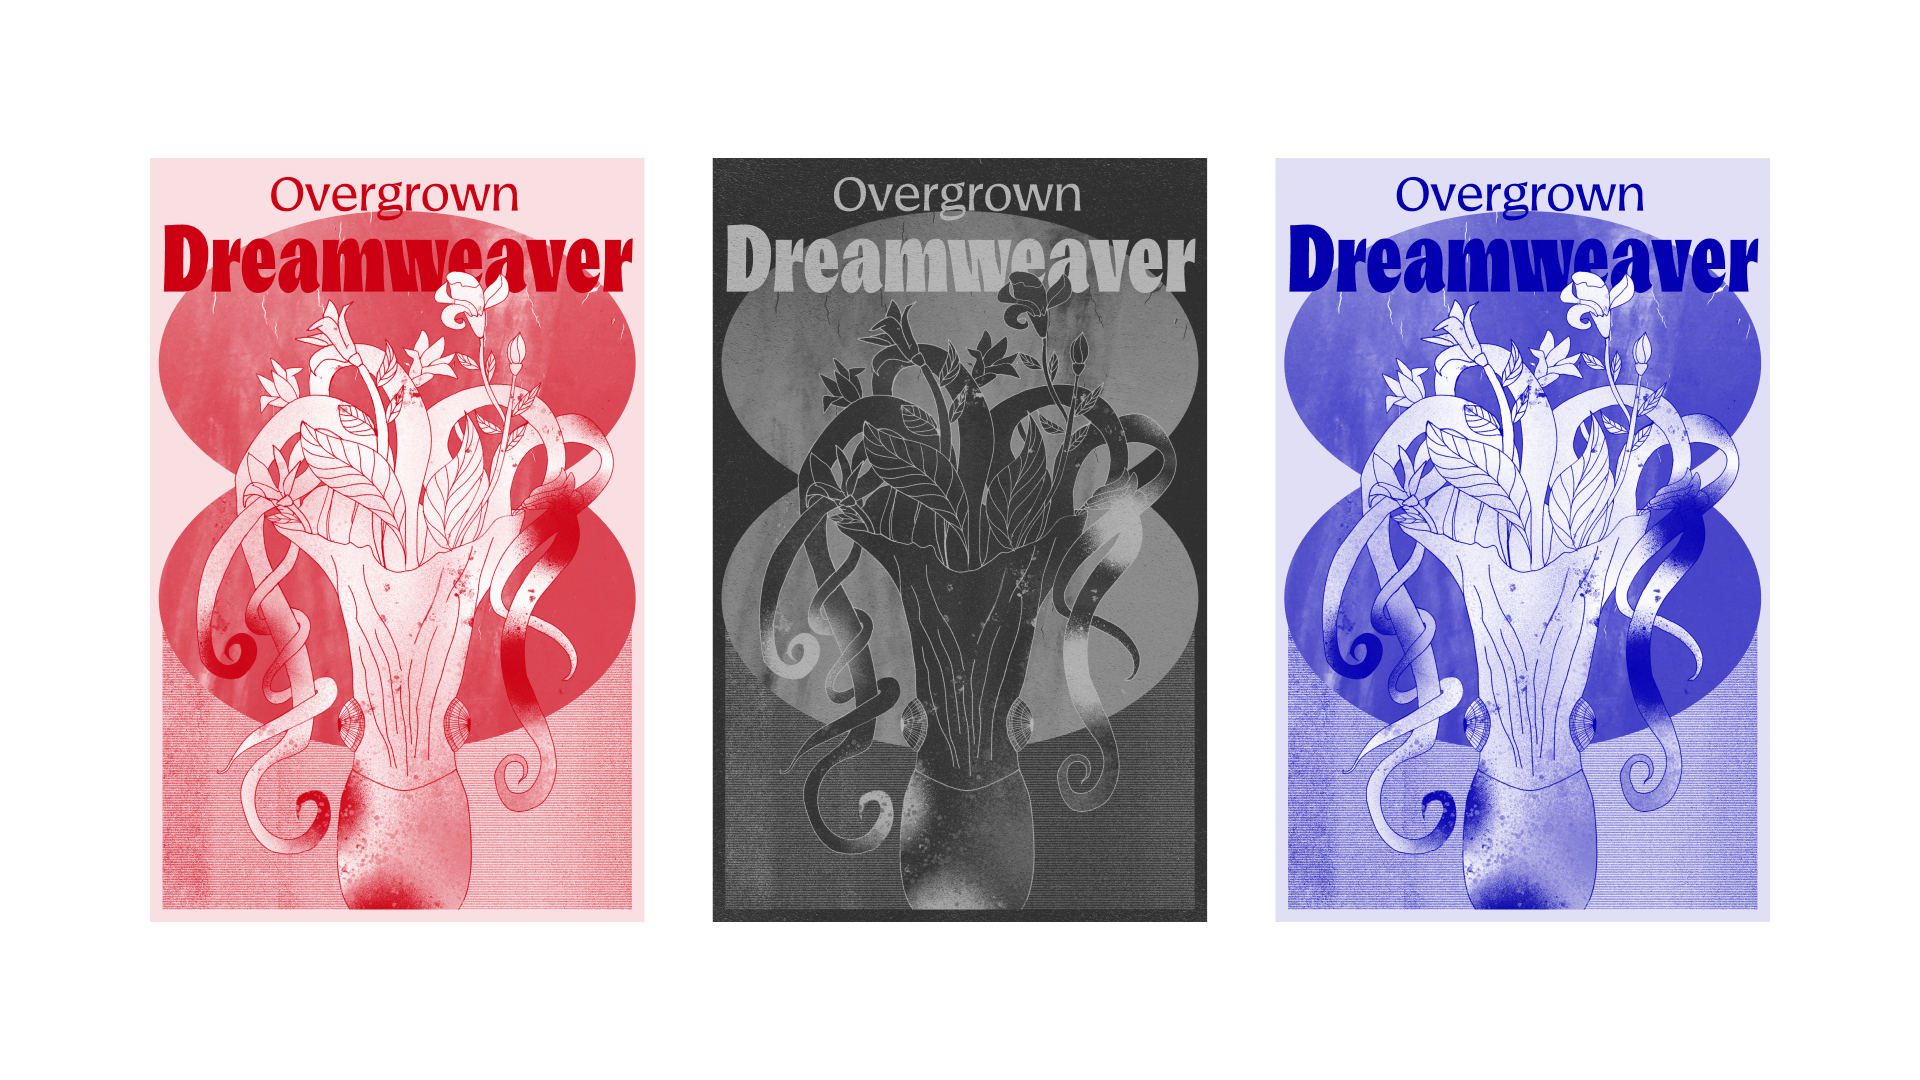 3 posters in a row containing the text Overgrown Dreamweaver and an illustration combing squid and plants.